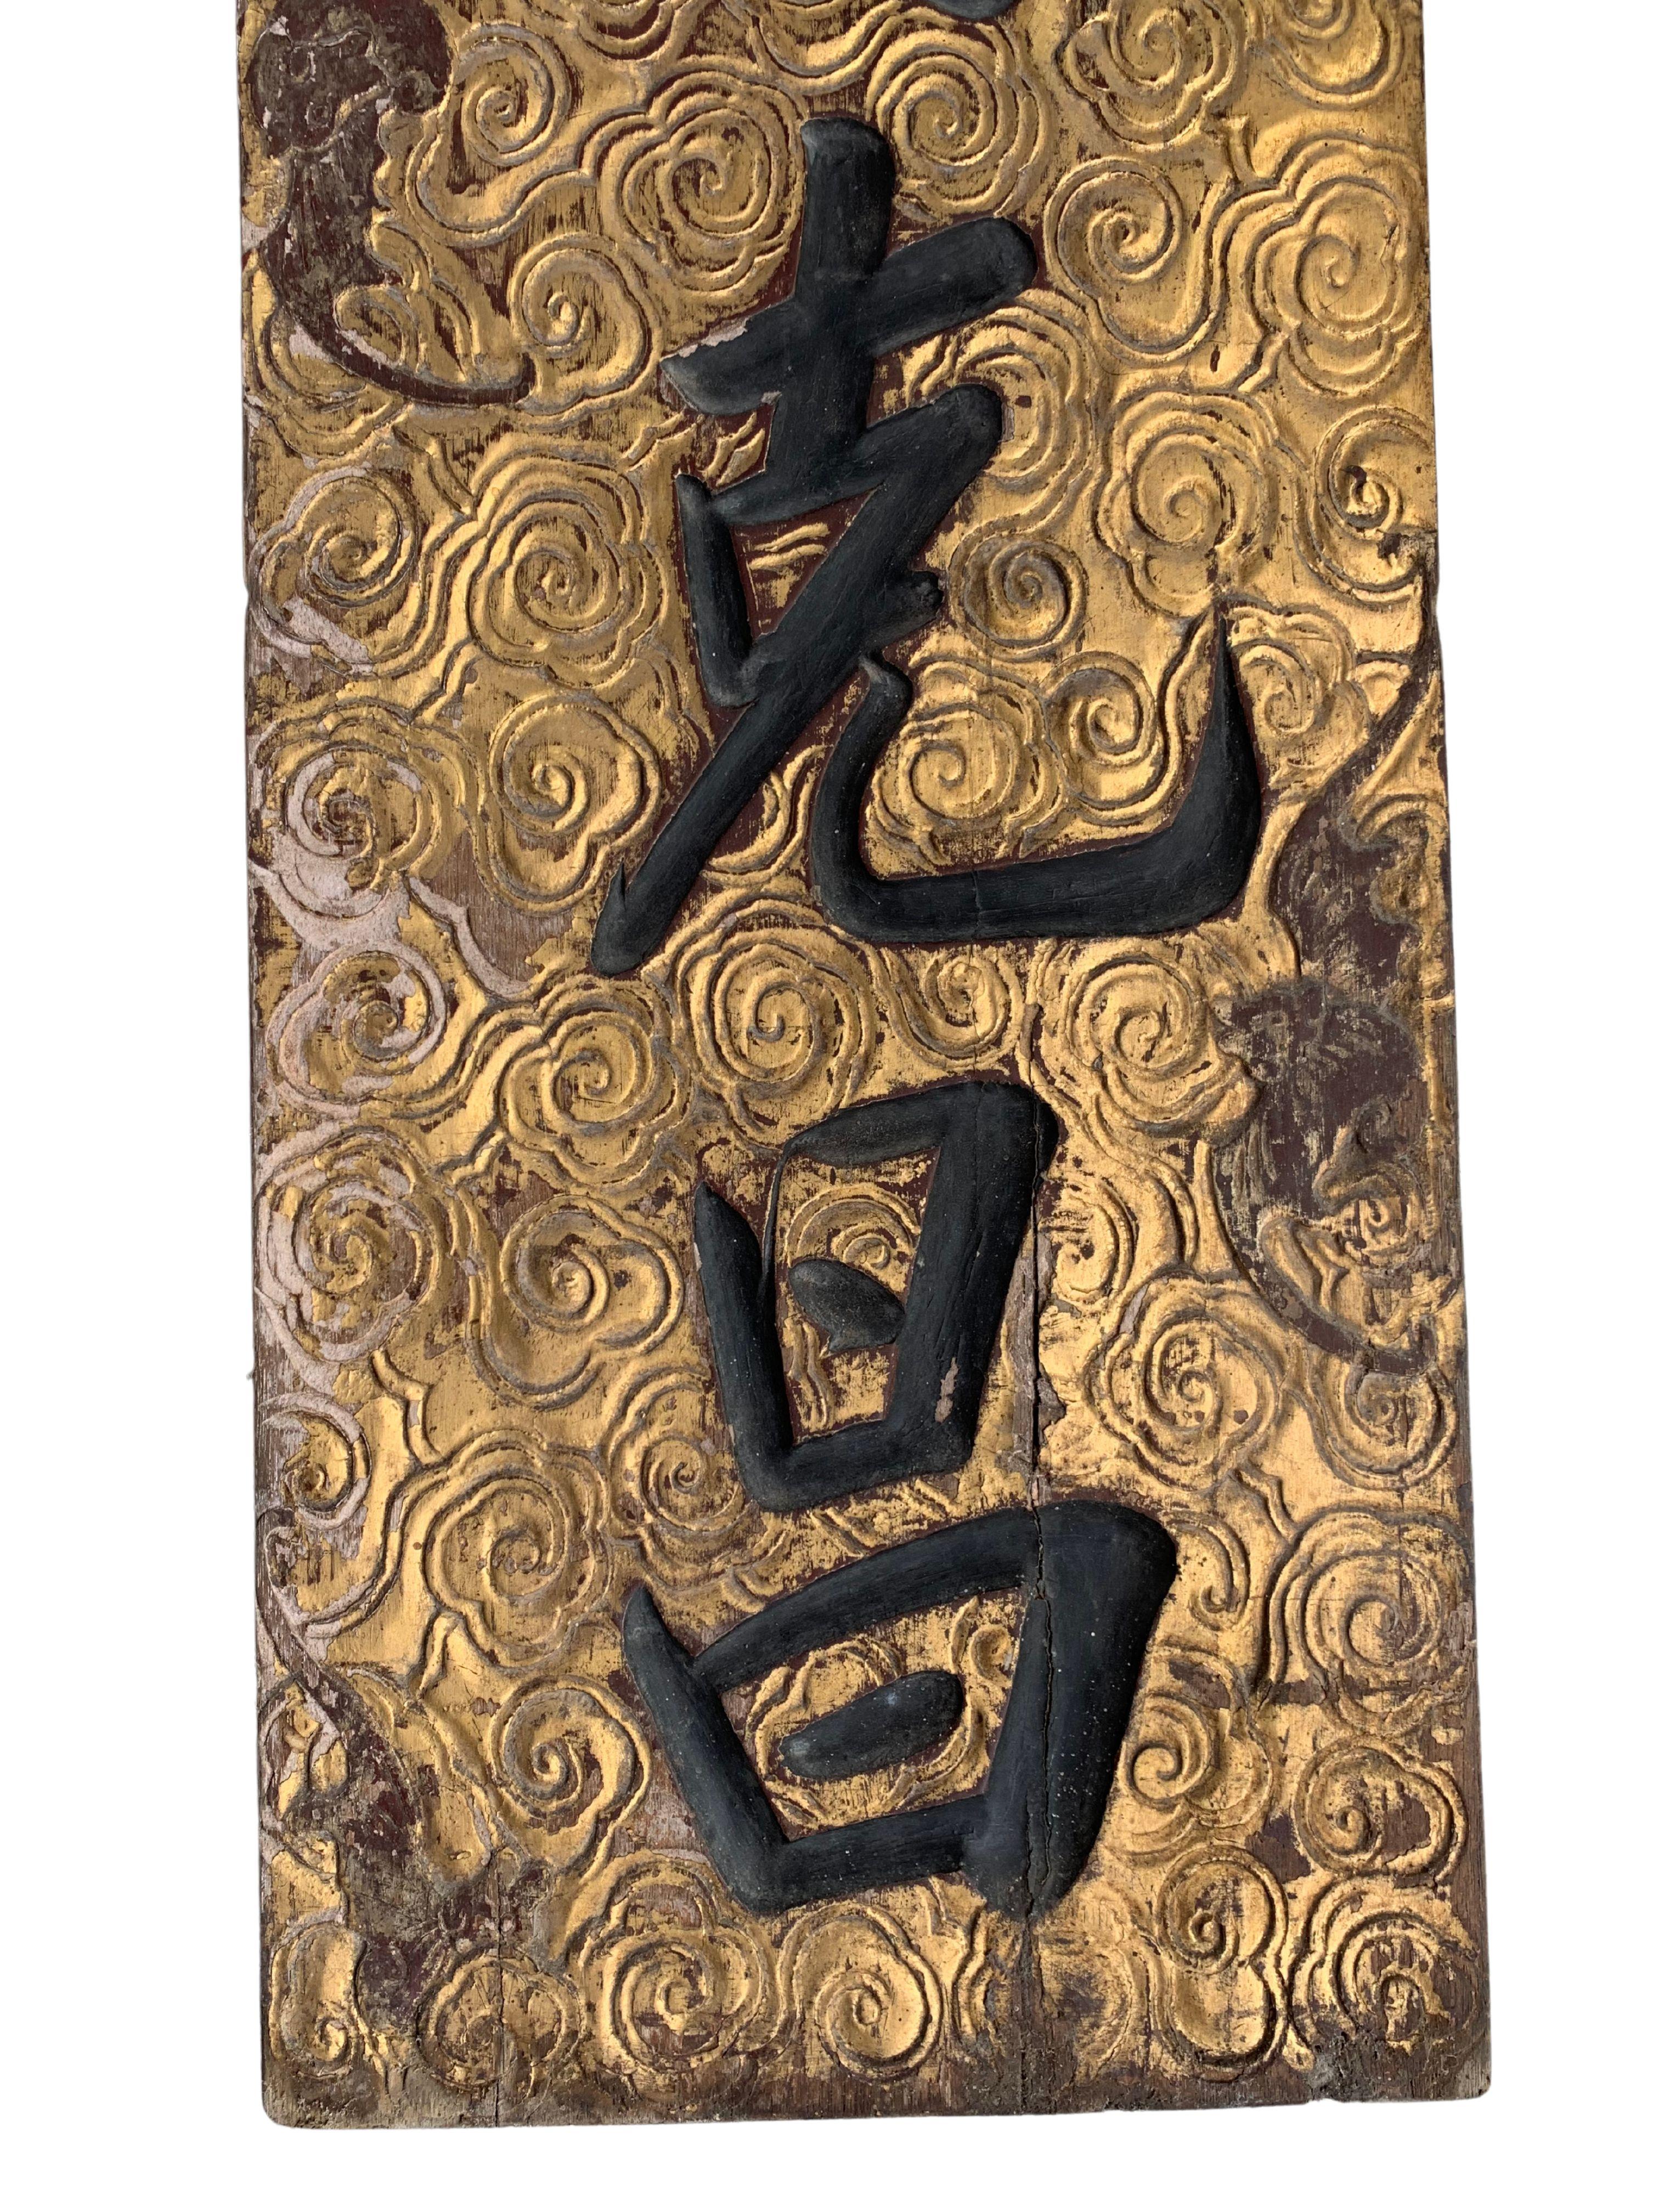 20th Century Large Chinese Signboard Gilded Pair with Calligraphy, C. 1900